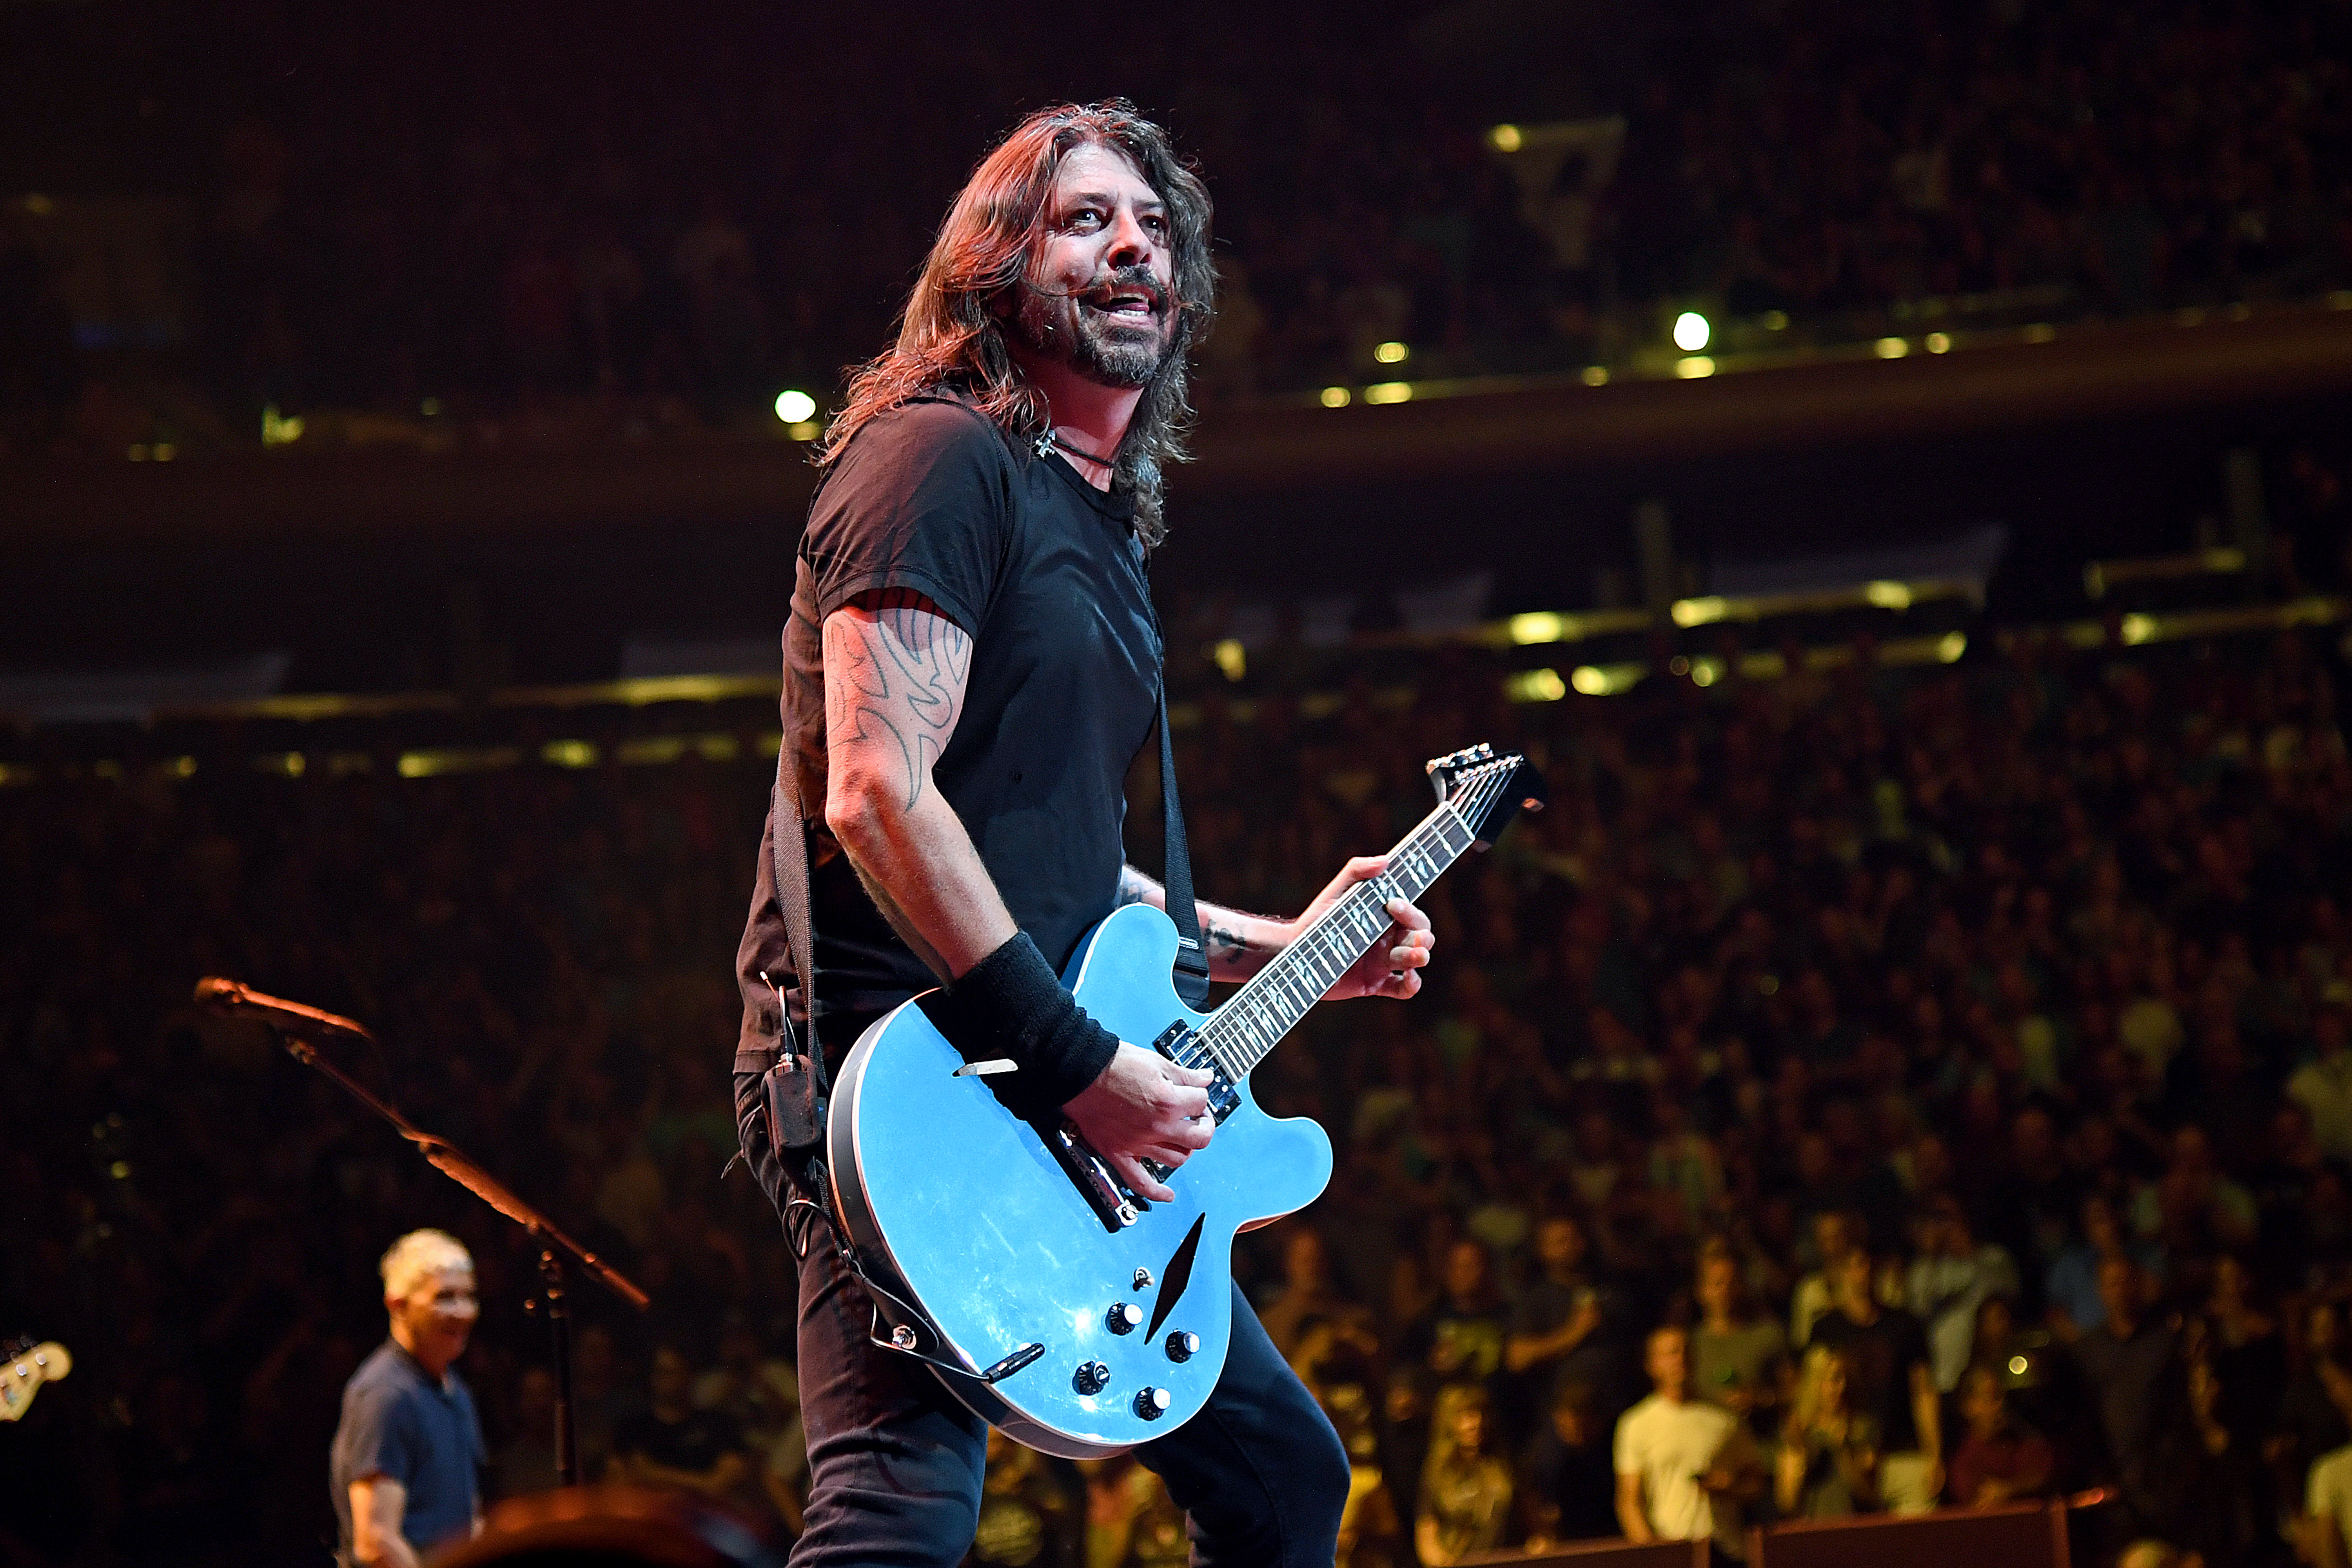 Louise once dated Foo Fighters frontman Dave Grohl